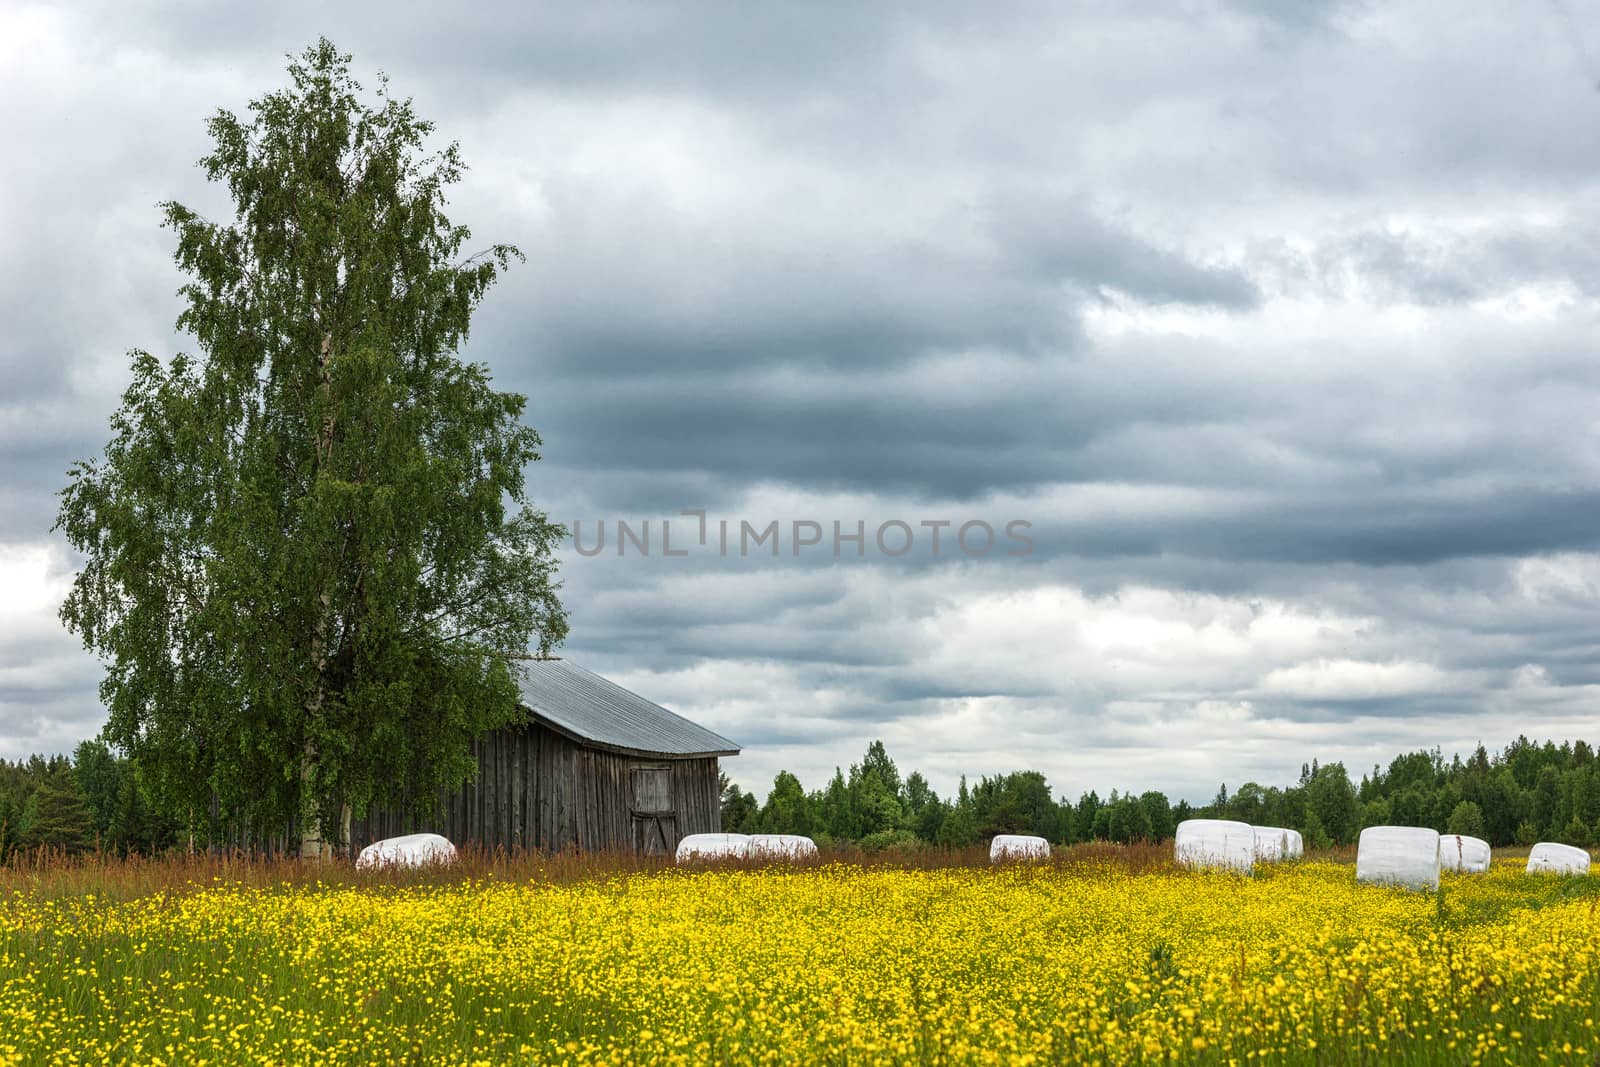 Hay captured in white plastic rolls will stay on the field until needed. A field of yellow wildflowers in the foreground, against stormy skies, with a barn half hidden behind a tree.